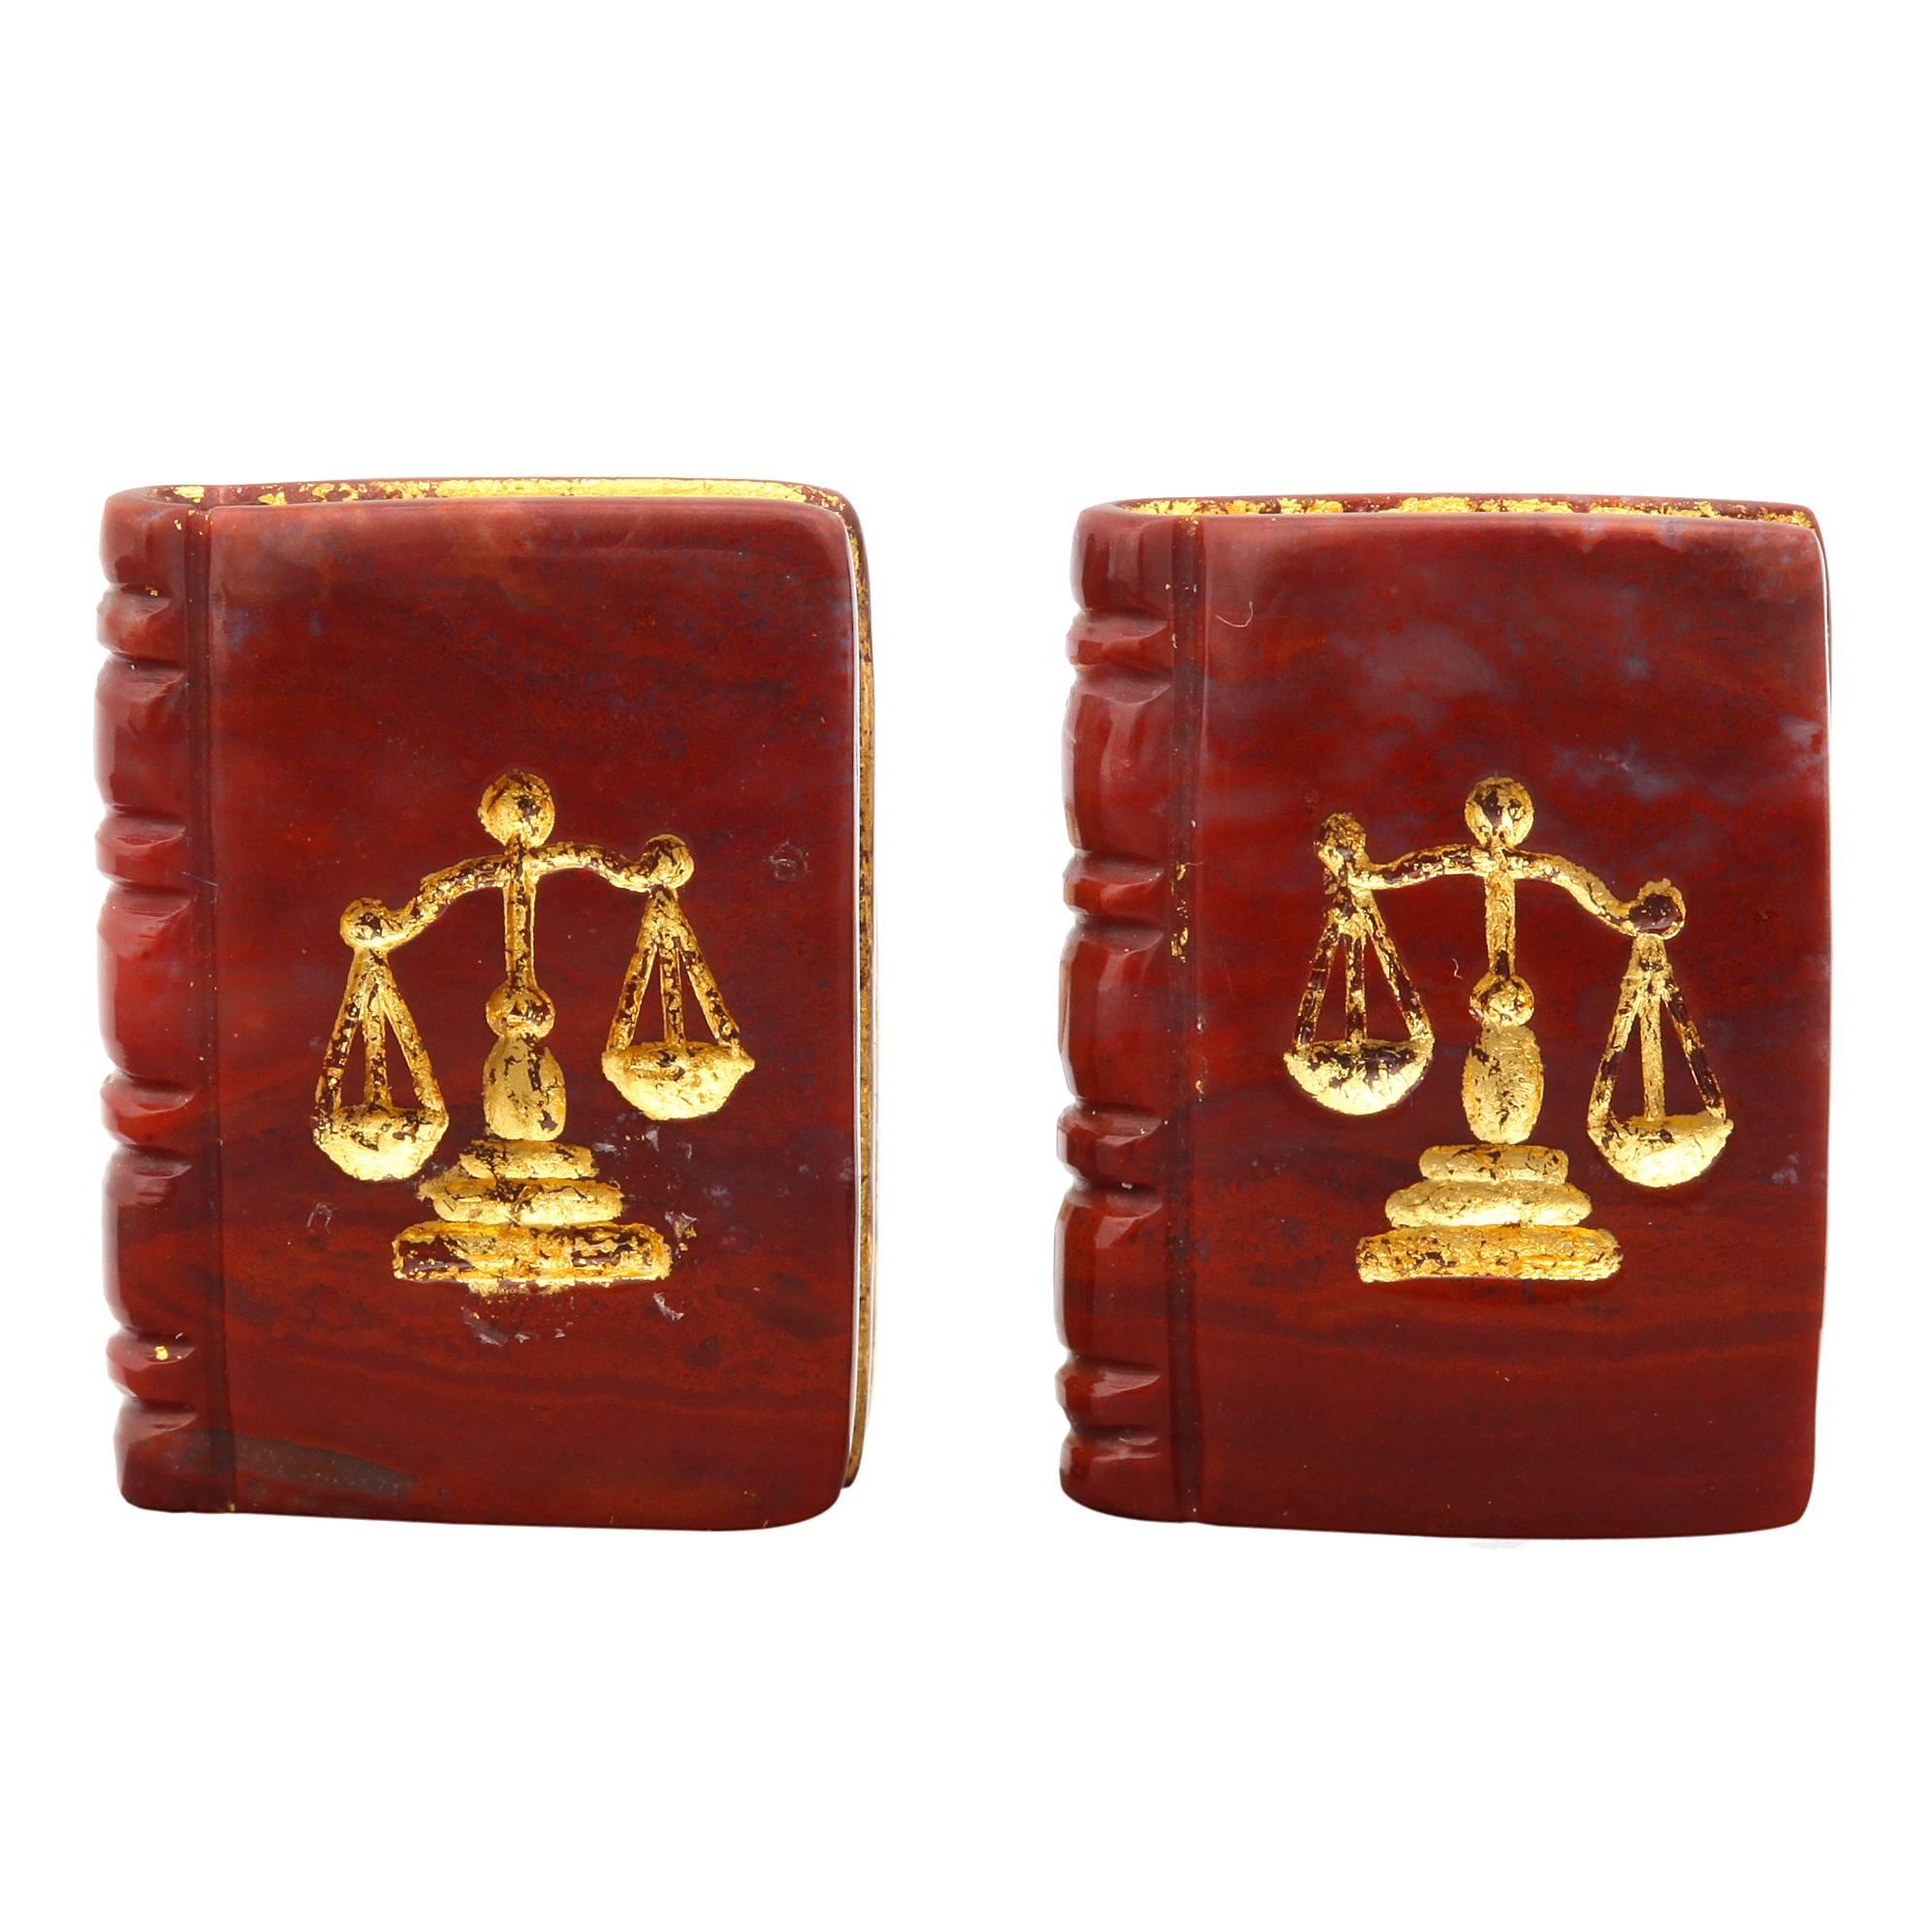  Michael Kanners  Carved Stone Legal Book Cufflinks